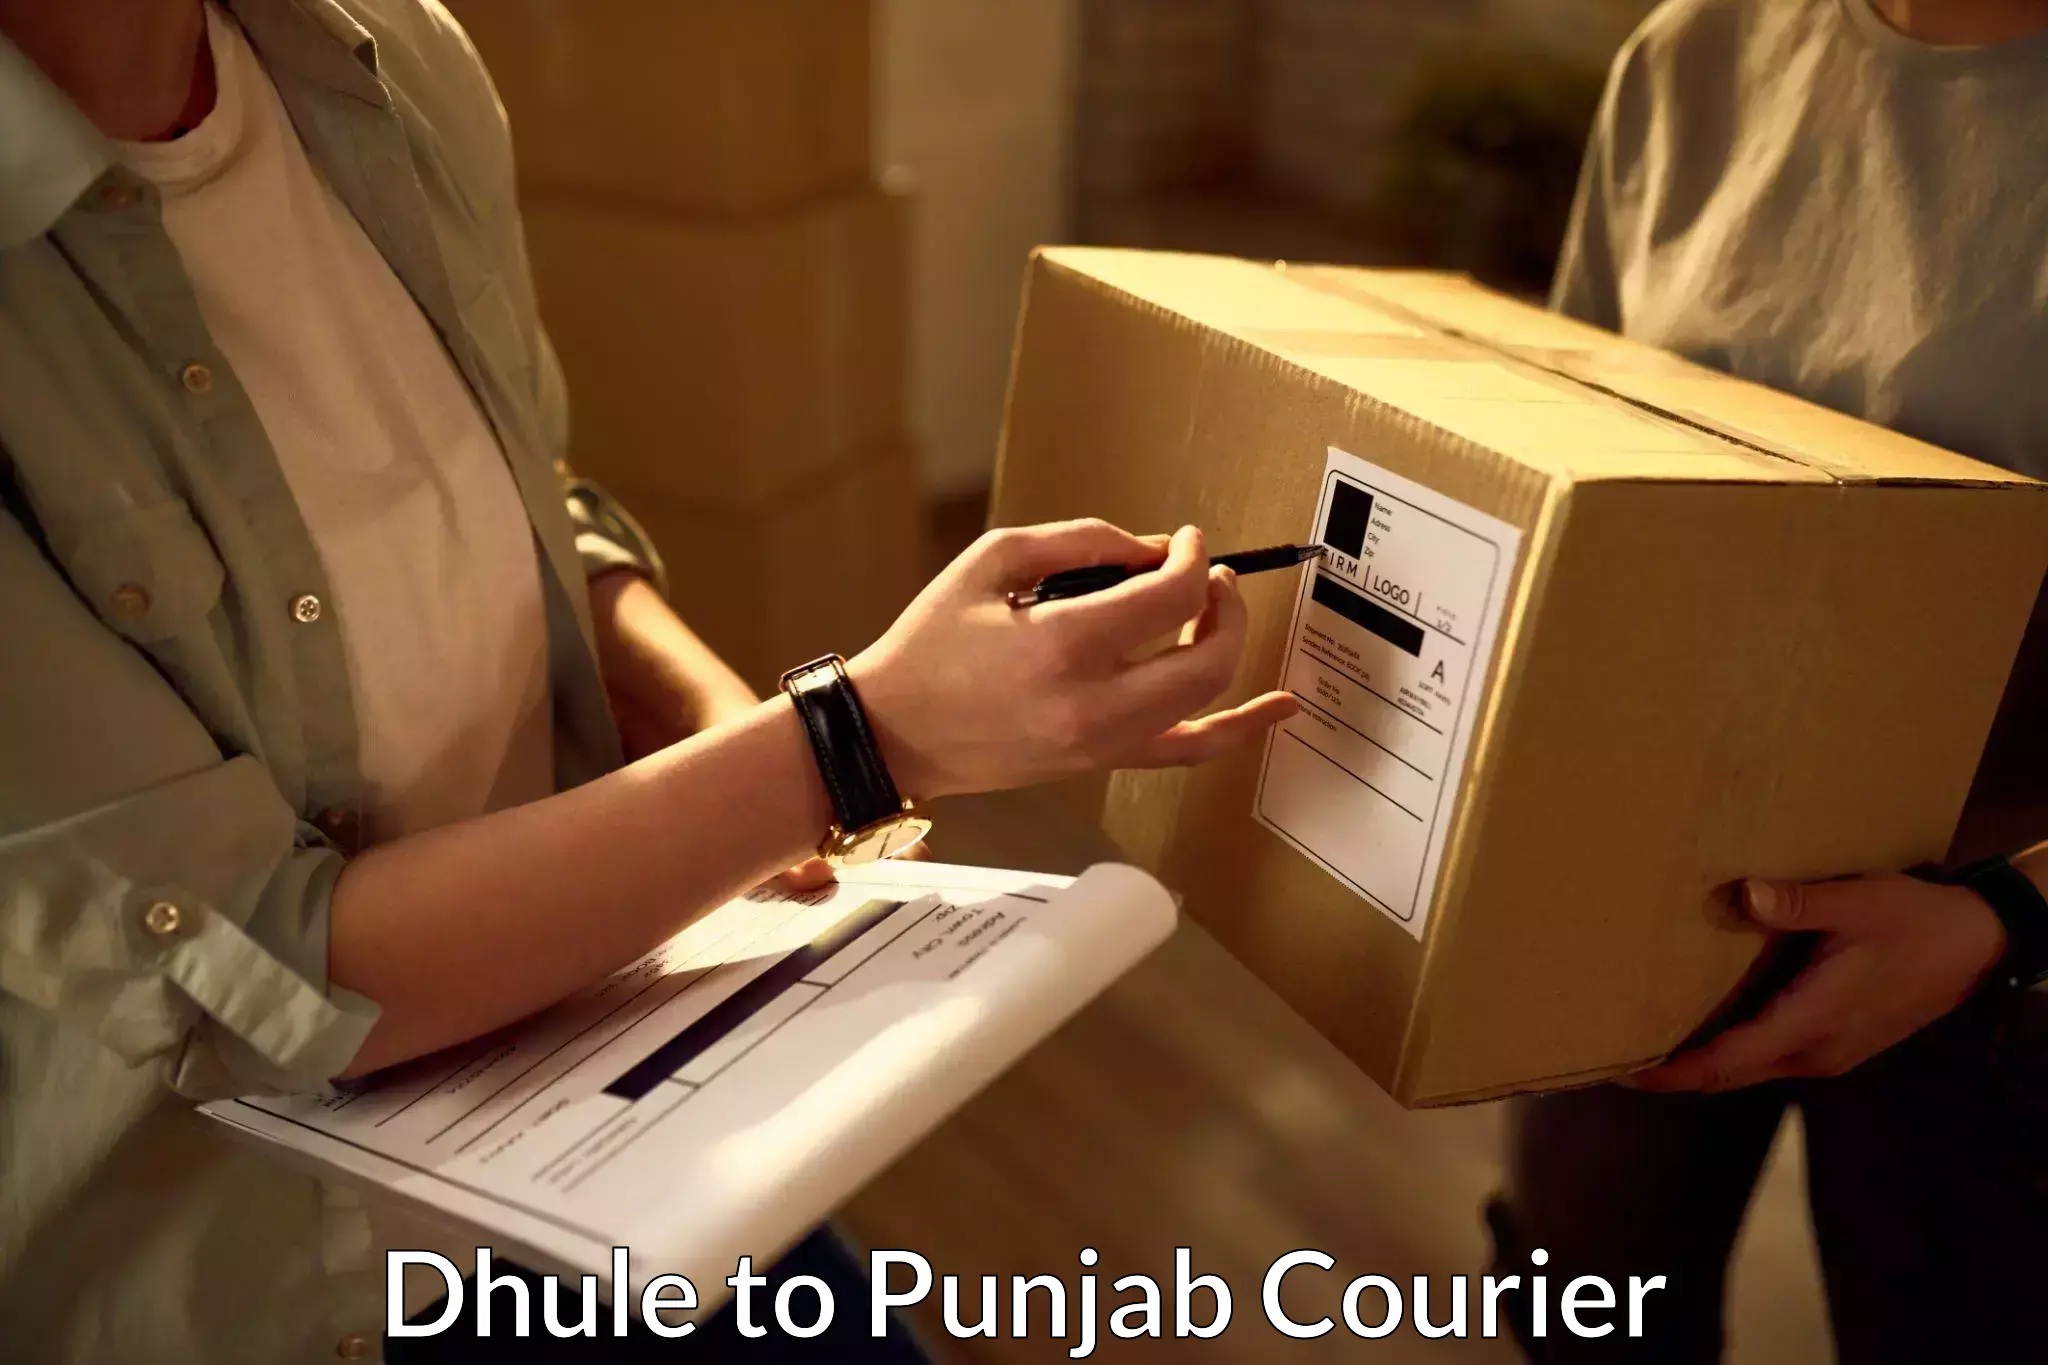 Rapid shipping services Dhule to Patiala